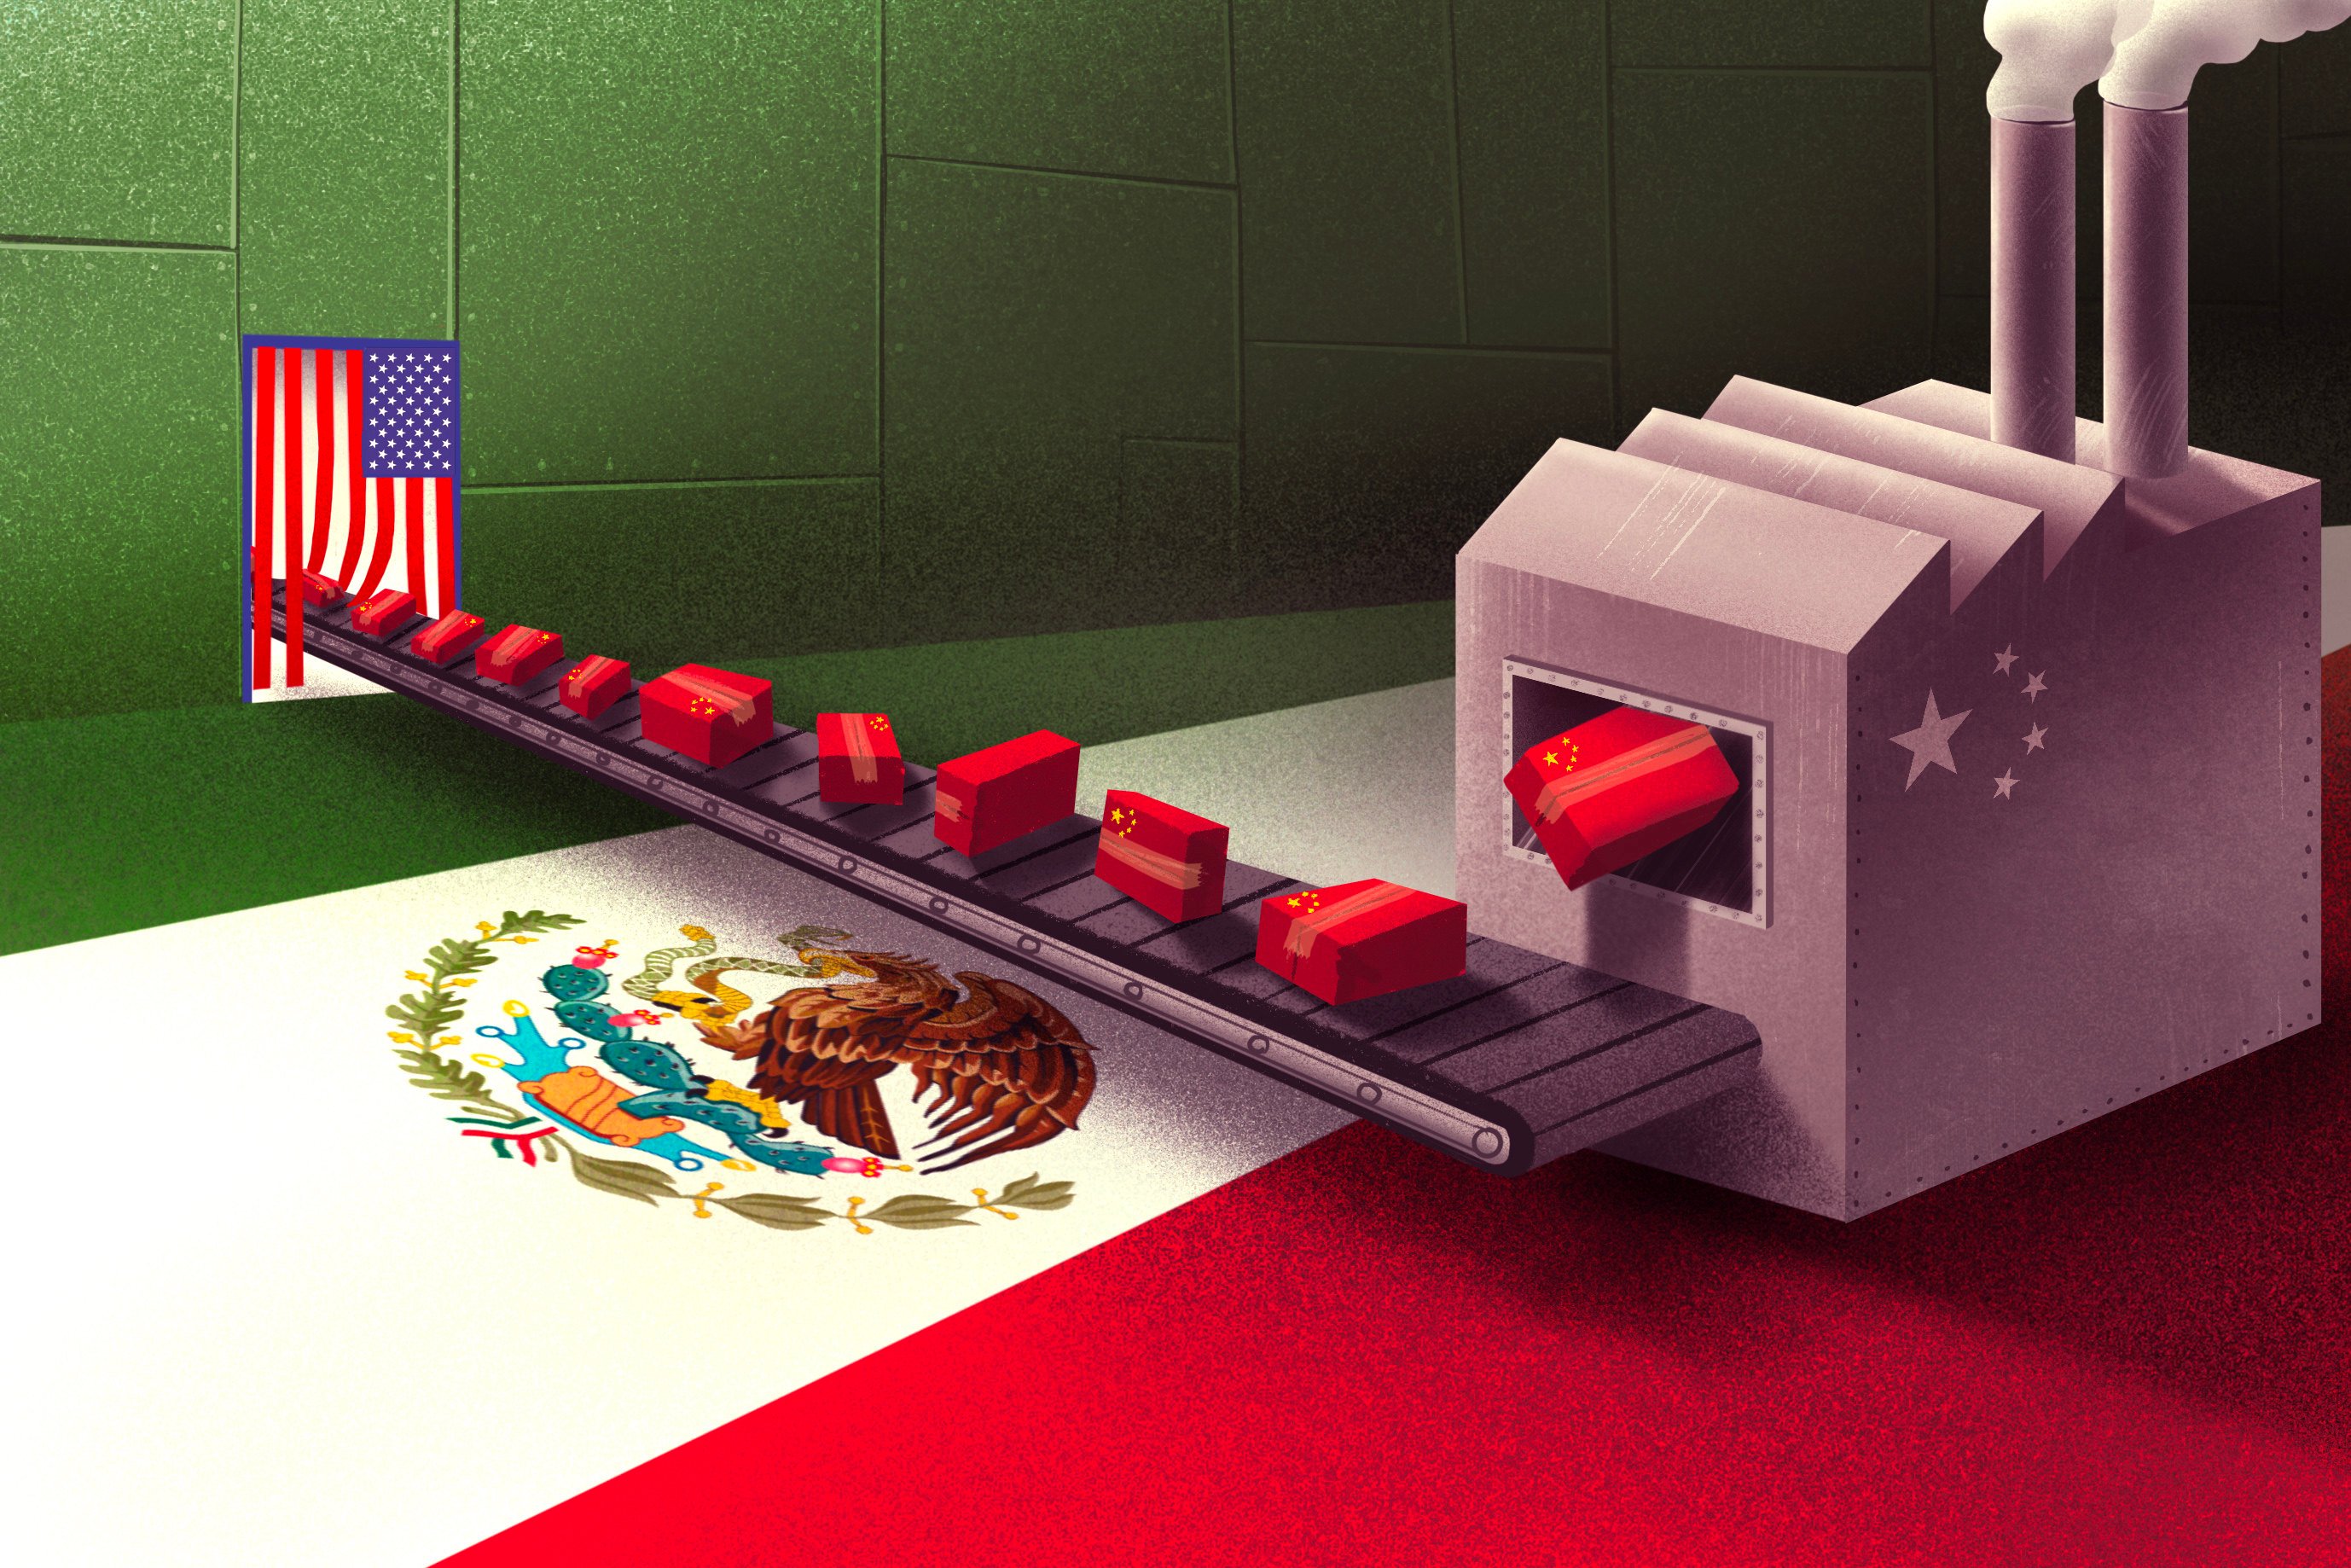 Chinese companies are moving production to Mexico to avoid tariff entanglements, but the US’ southern neighbour offers more than a detour. Illustration: Davies Christian Surya